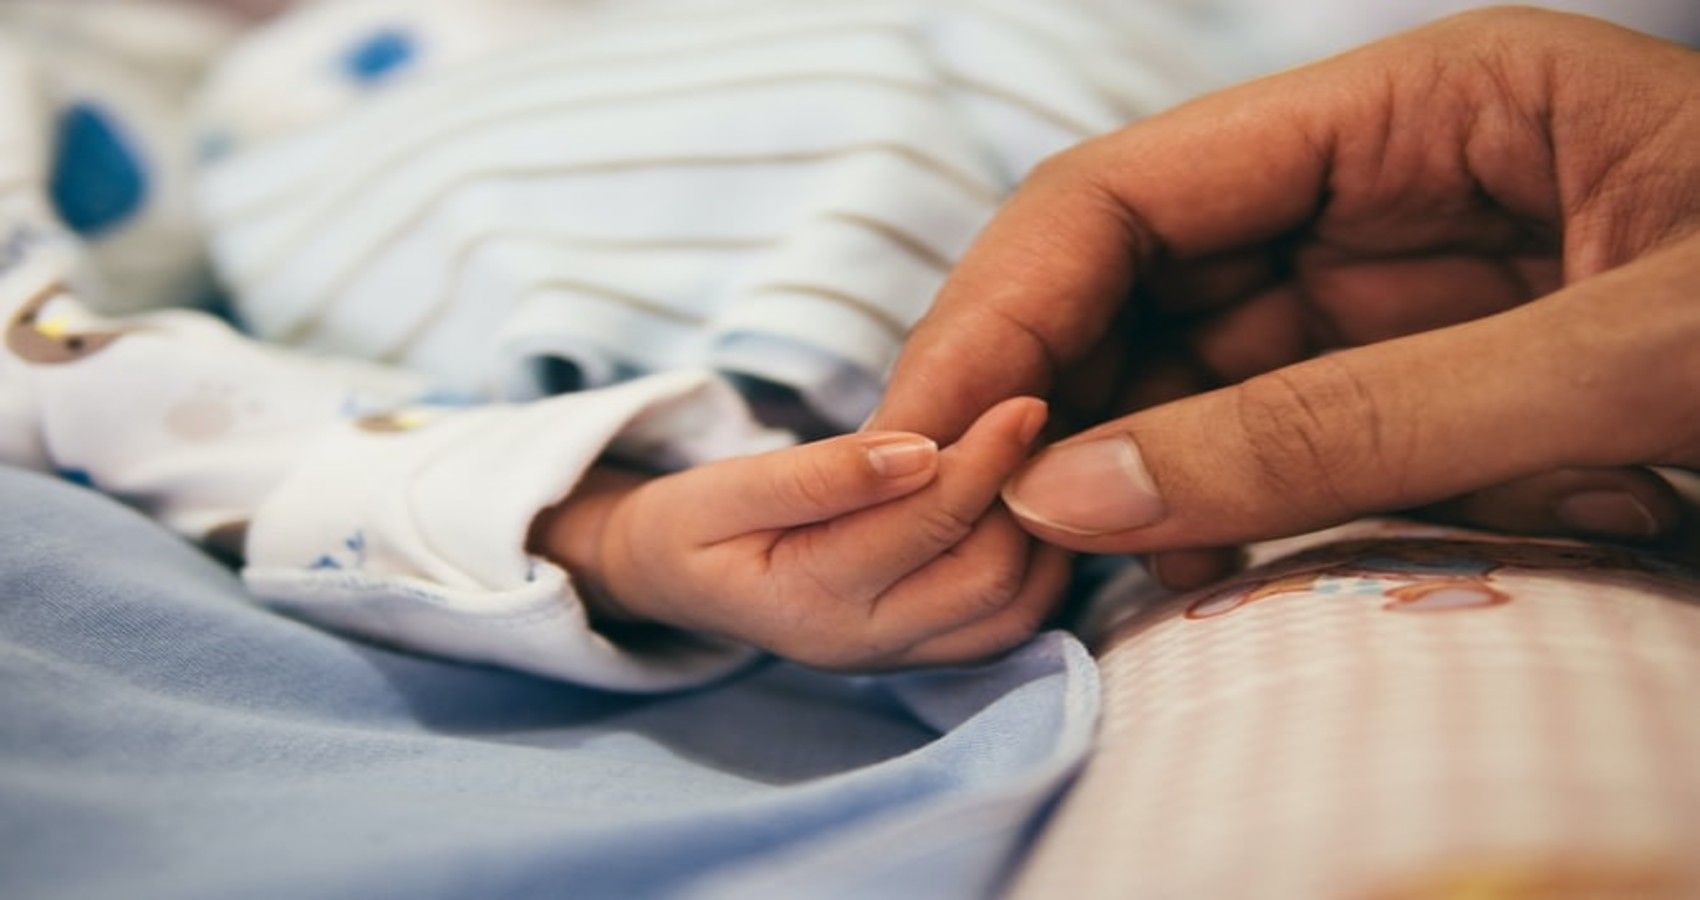 Studies Show DNA Connection for Prematurity